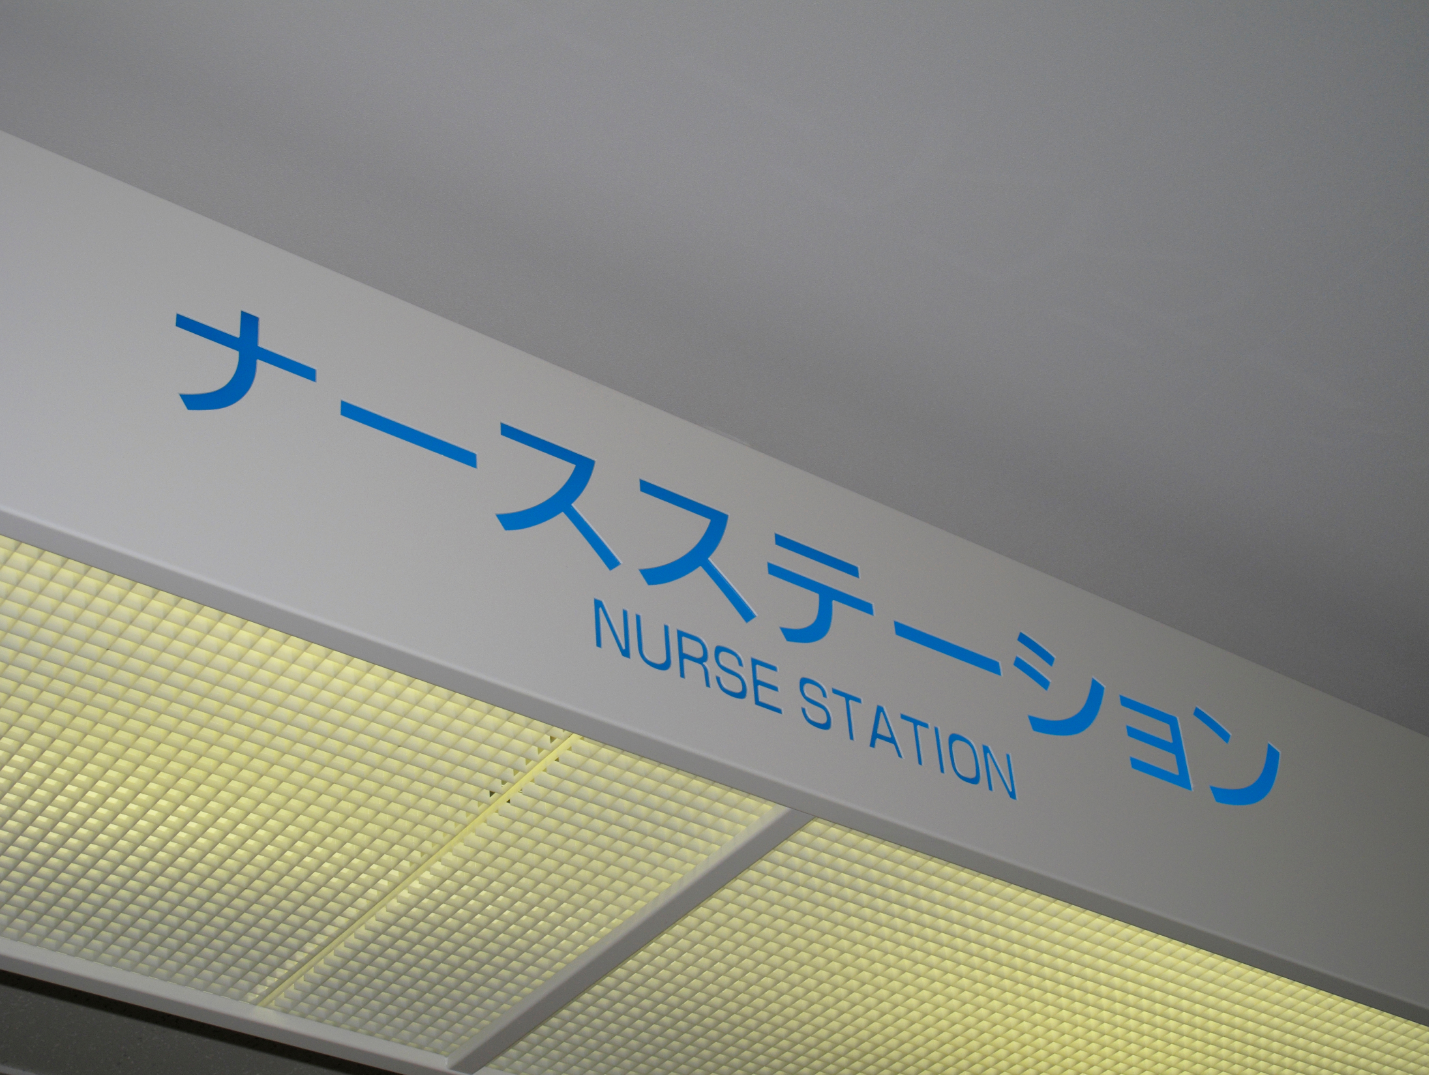 Japan plans to increase wage for care workers and nurses